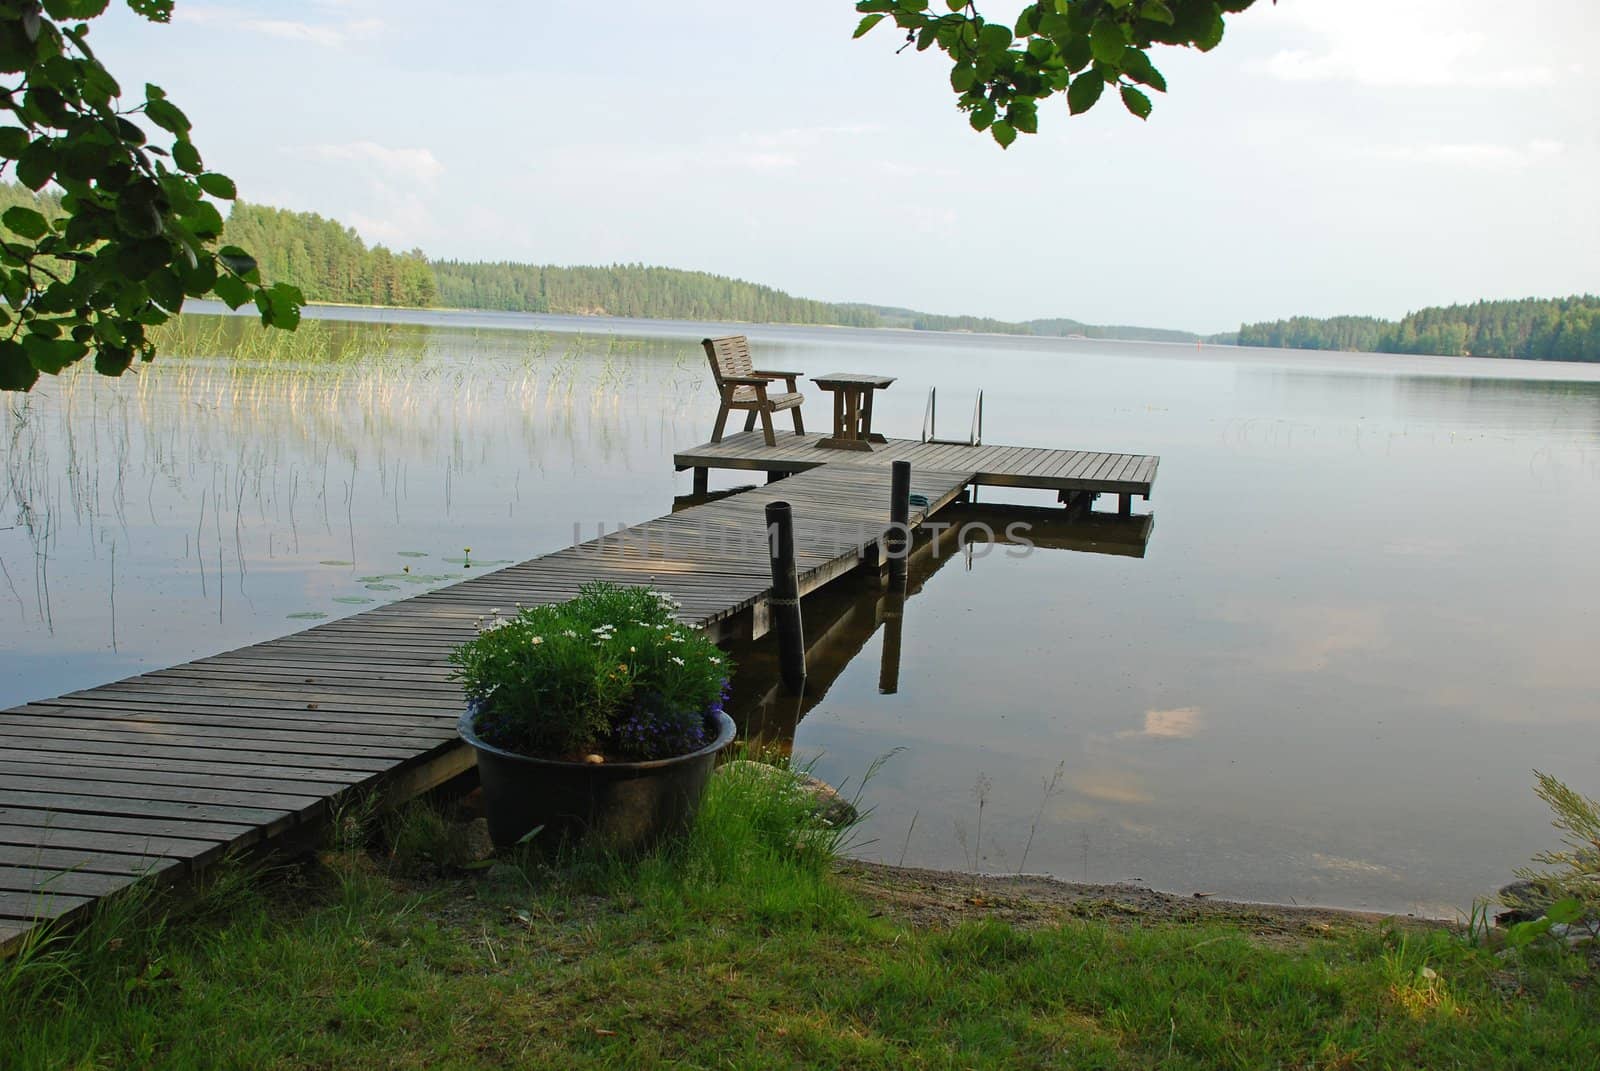 Wooden path in the border of a Lake, for the rest, fishing, swiming,  its very typical atribute of finnich lifestile in Central Finland, there are forests at the background